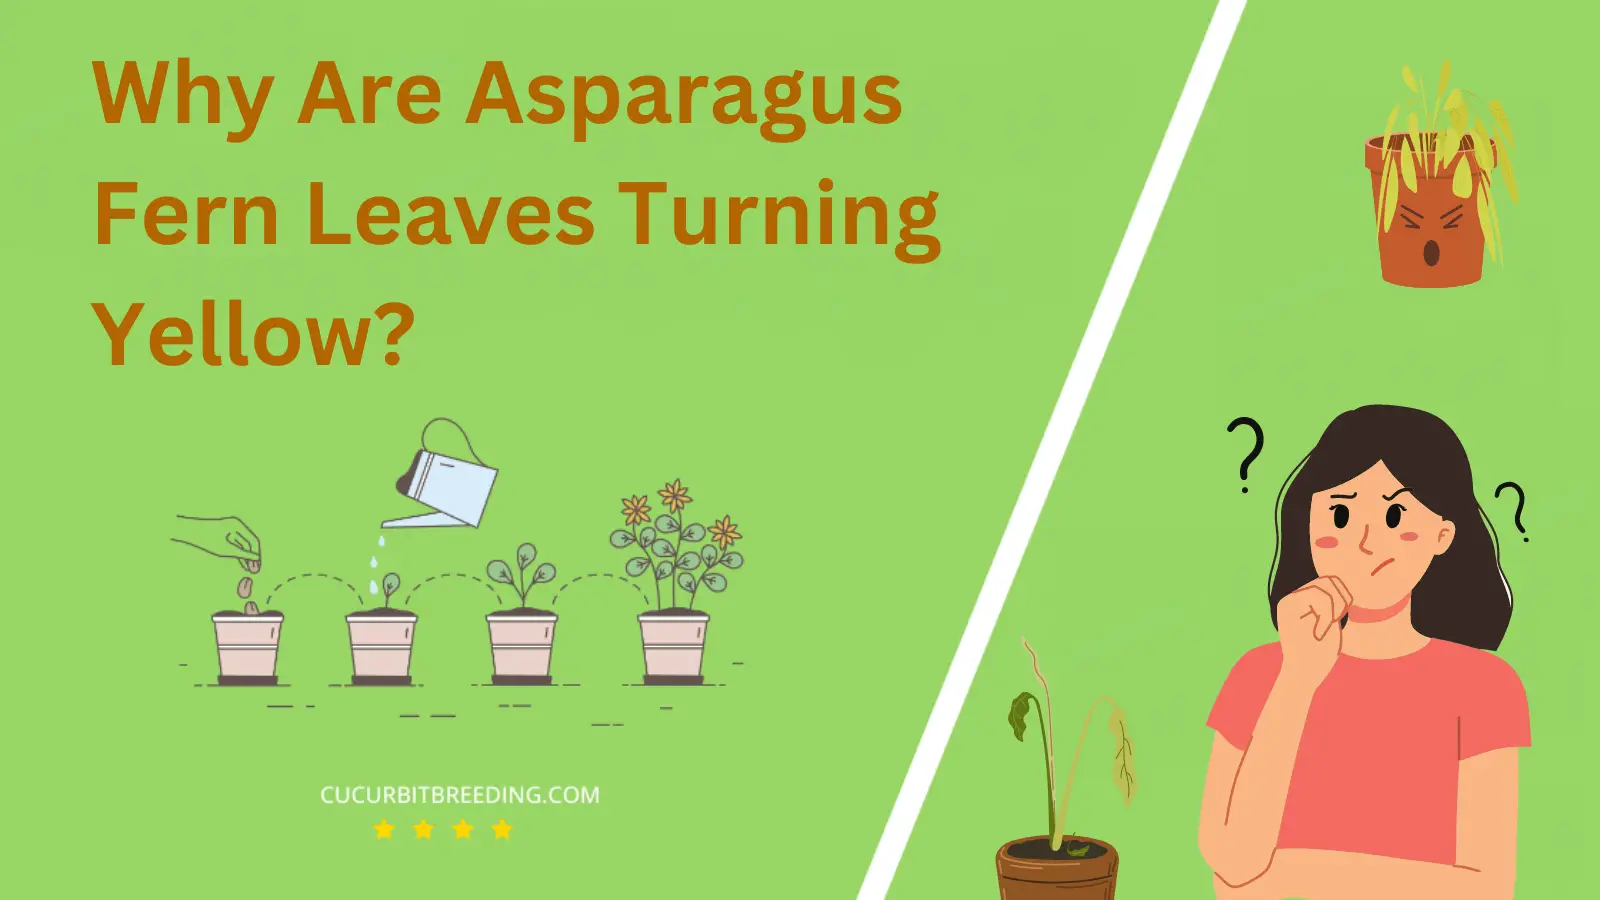 Why Are Asparagus Fern Leaves Turning Yellow